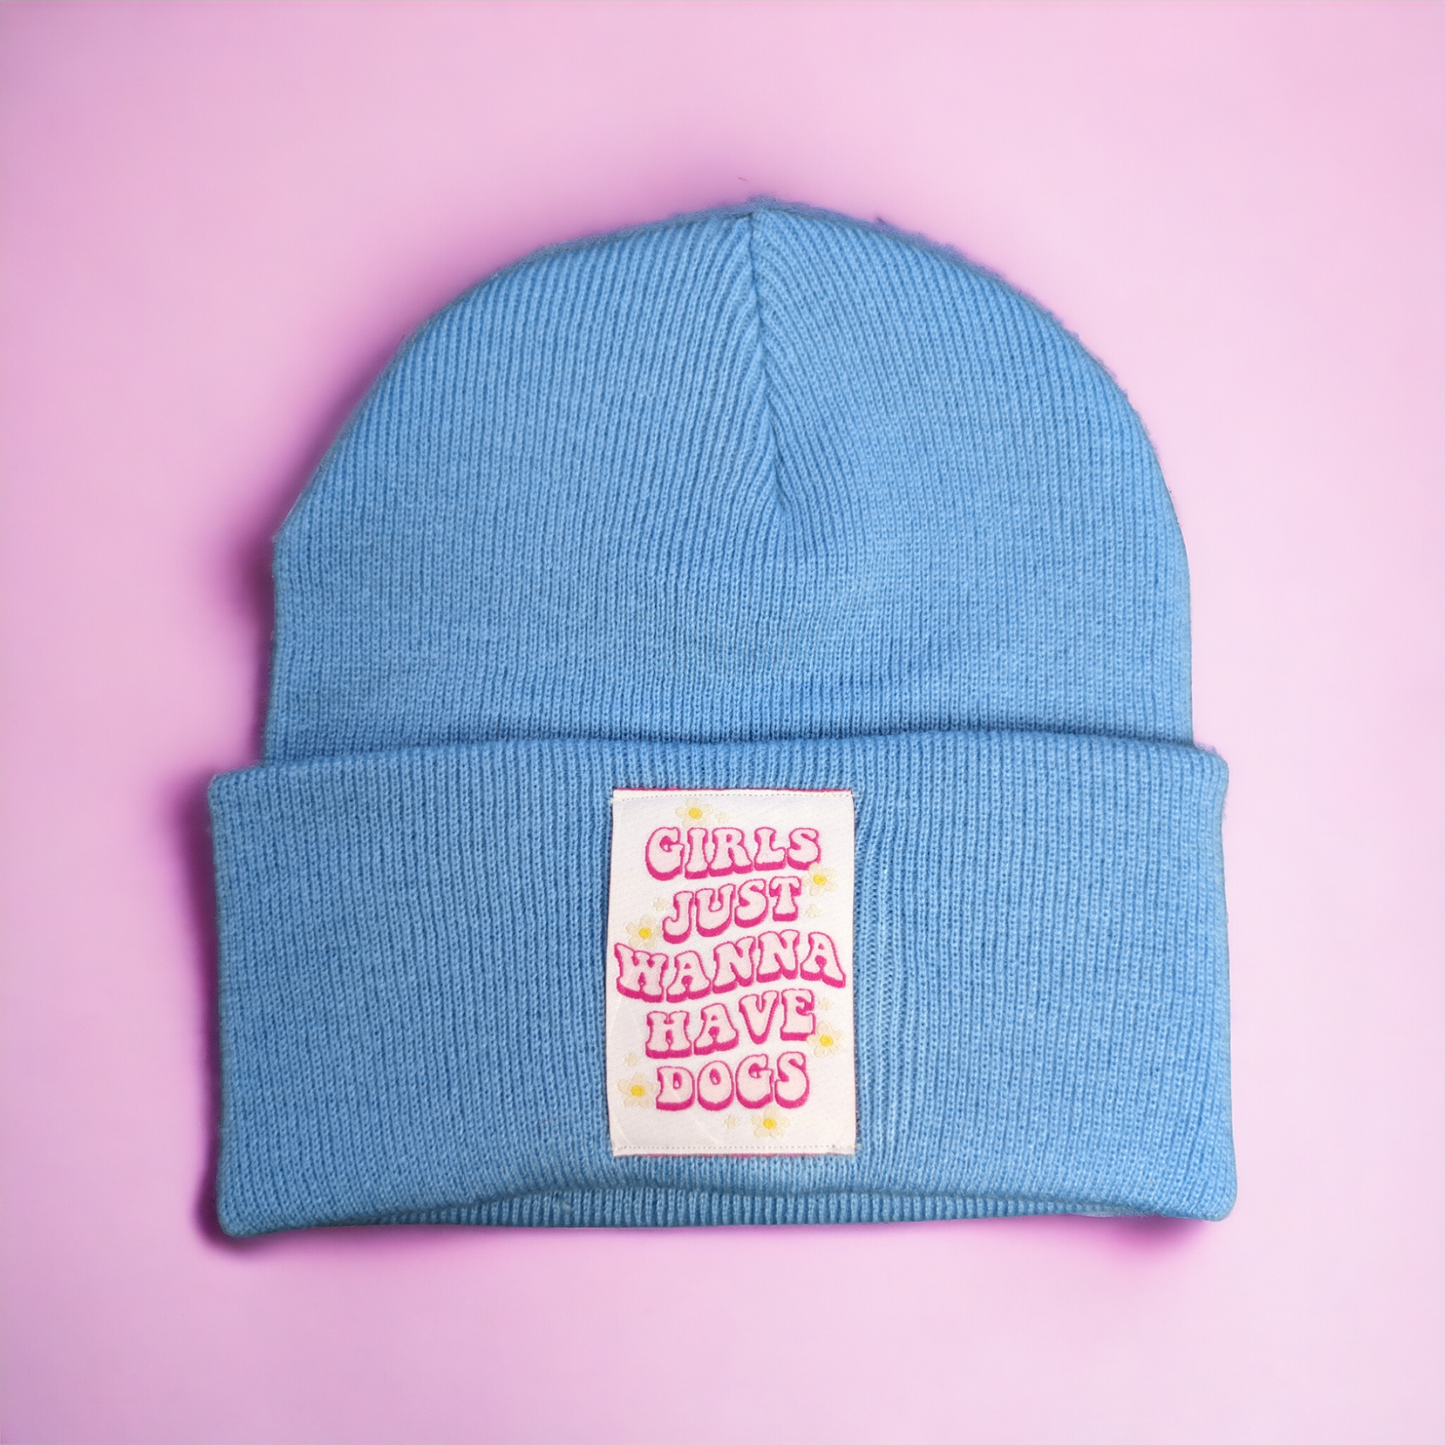 Girls Just Wanna Have Dogs Beanie